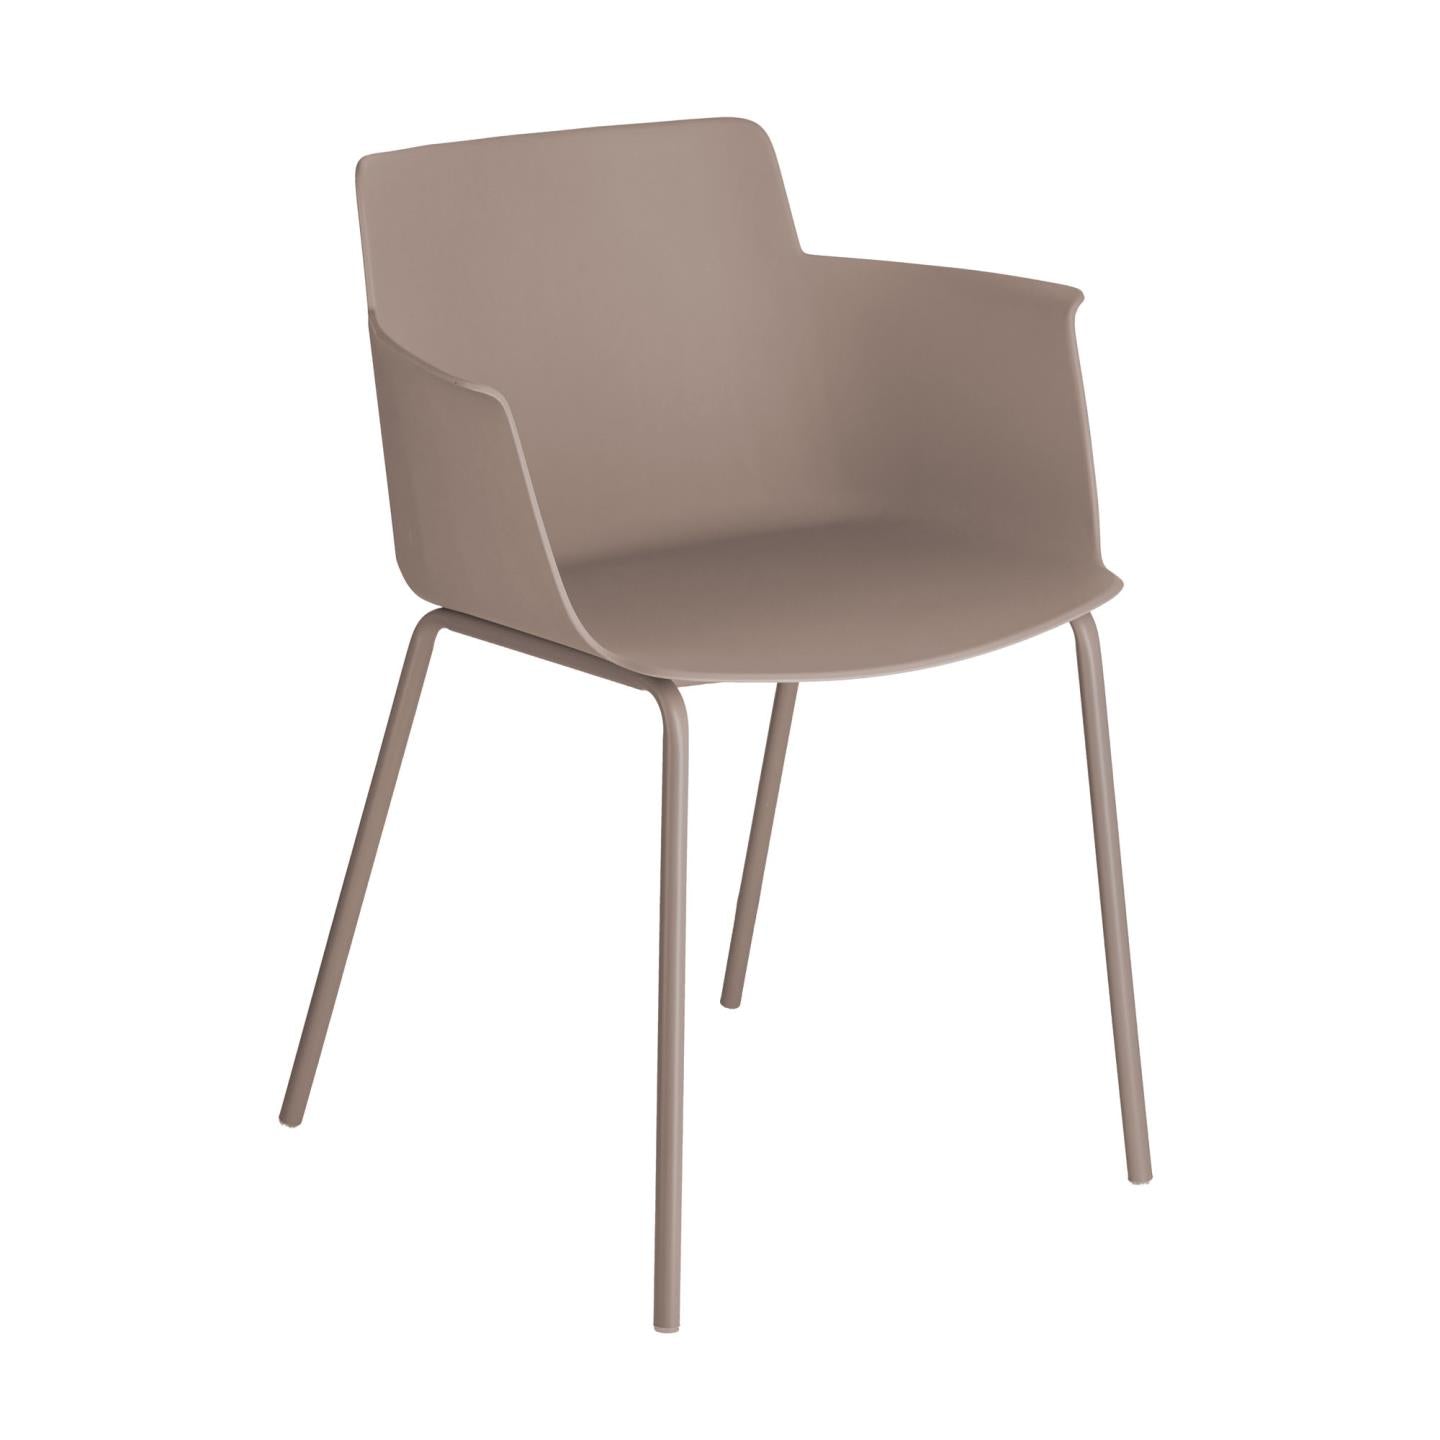 Hannia brown chair with arms